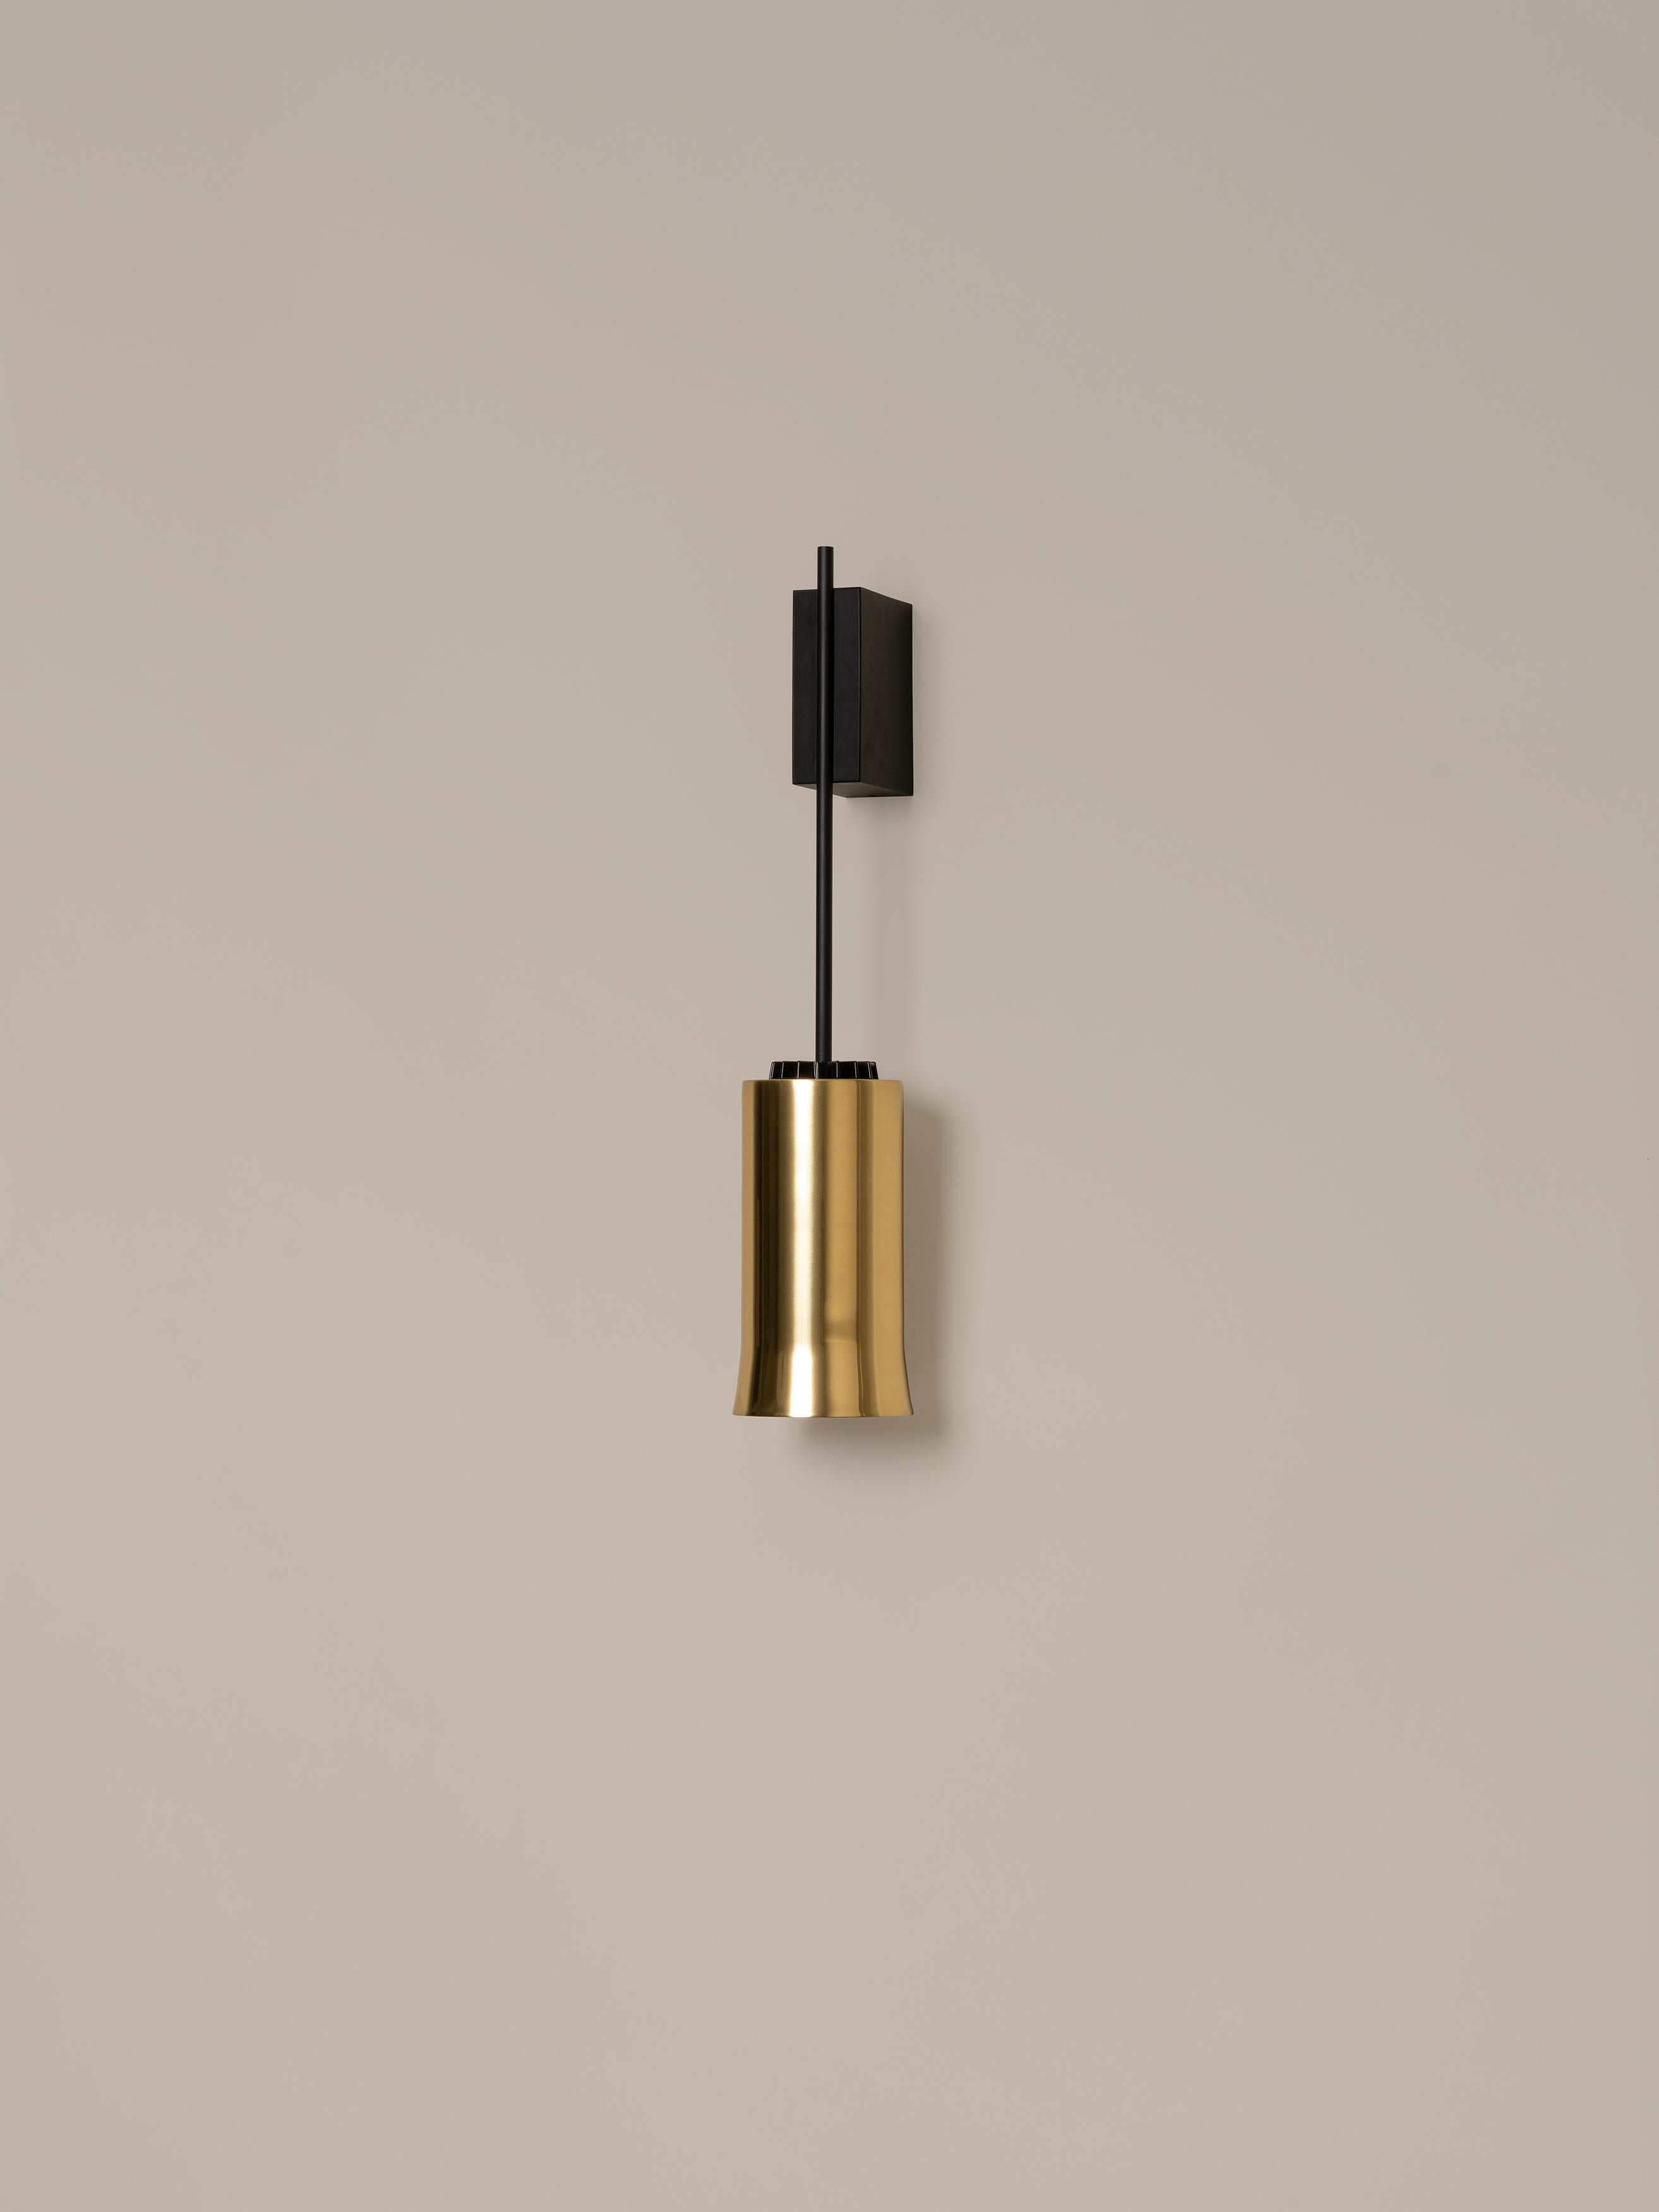 Brass cirio wall lamp by Antoni Arola
Dimensions: D 11 x W 14 x H 54 cm
Materials: Metal, polished brass.

The wall version of Cirio allows the light to be placed at a closer scale to the user. This creates a succession of rhythms that, in